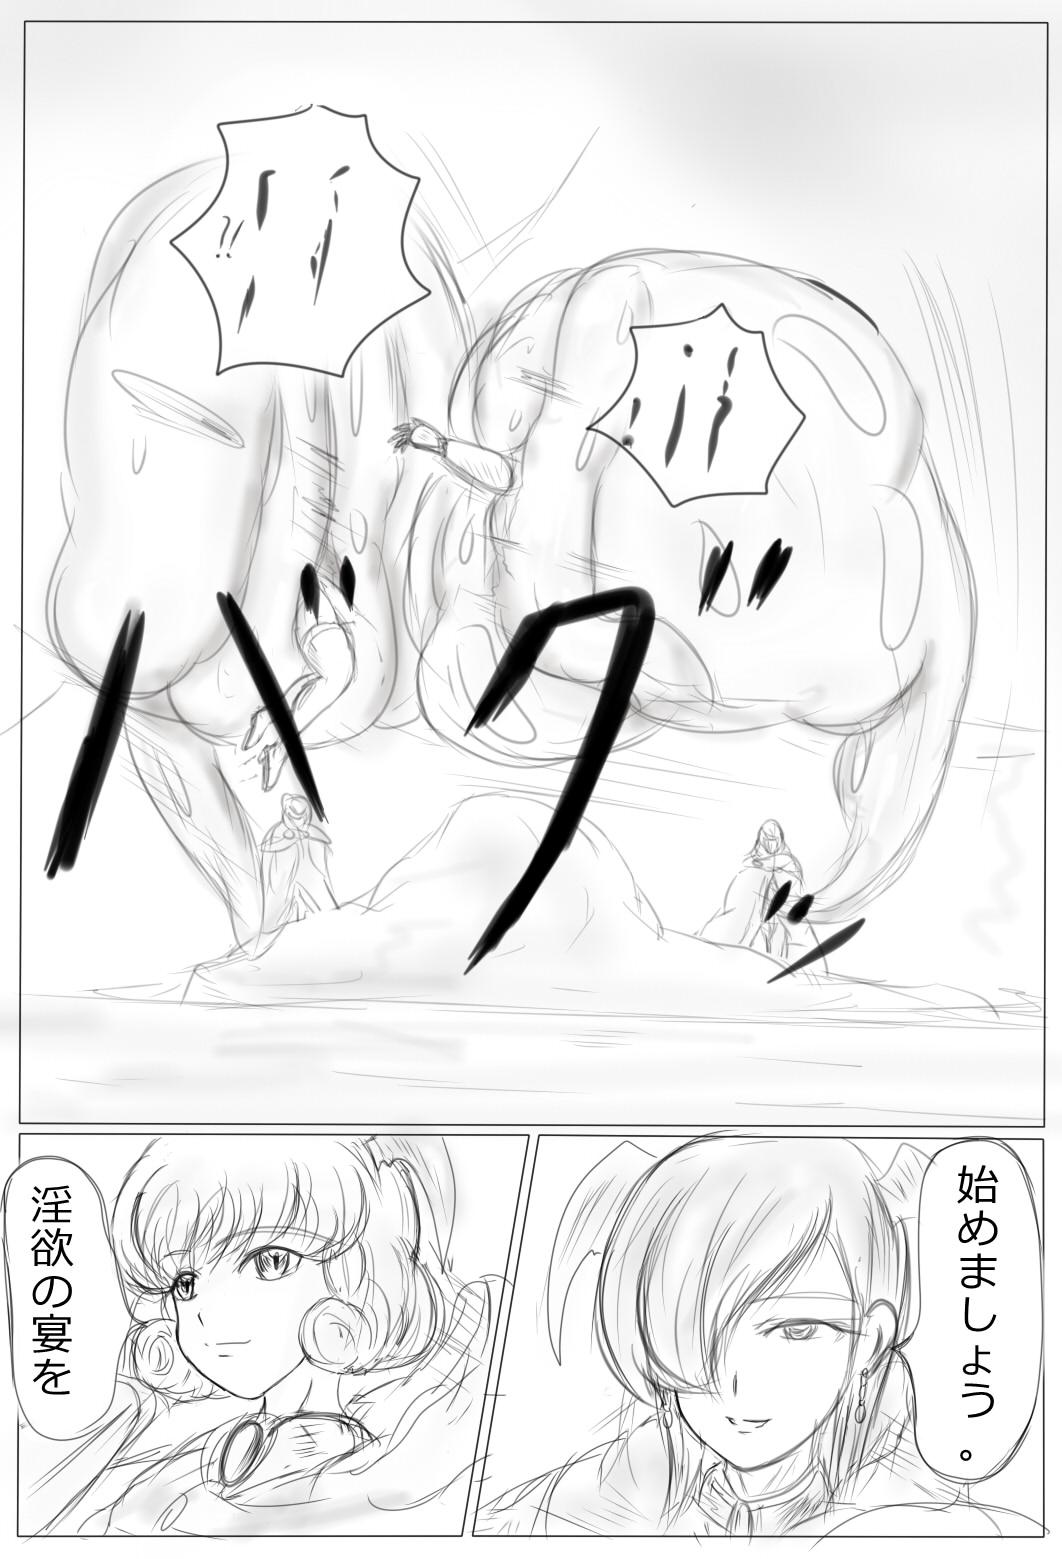 Anal Play [がんすきー] Claire to Rin ~Inma no Nie~ Ch. 1-2 Blowjob - Page 4